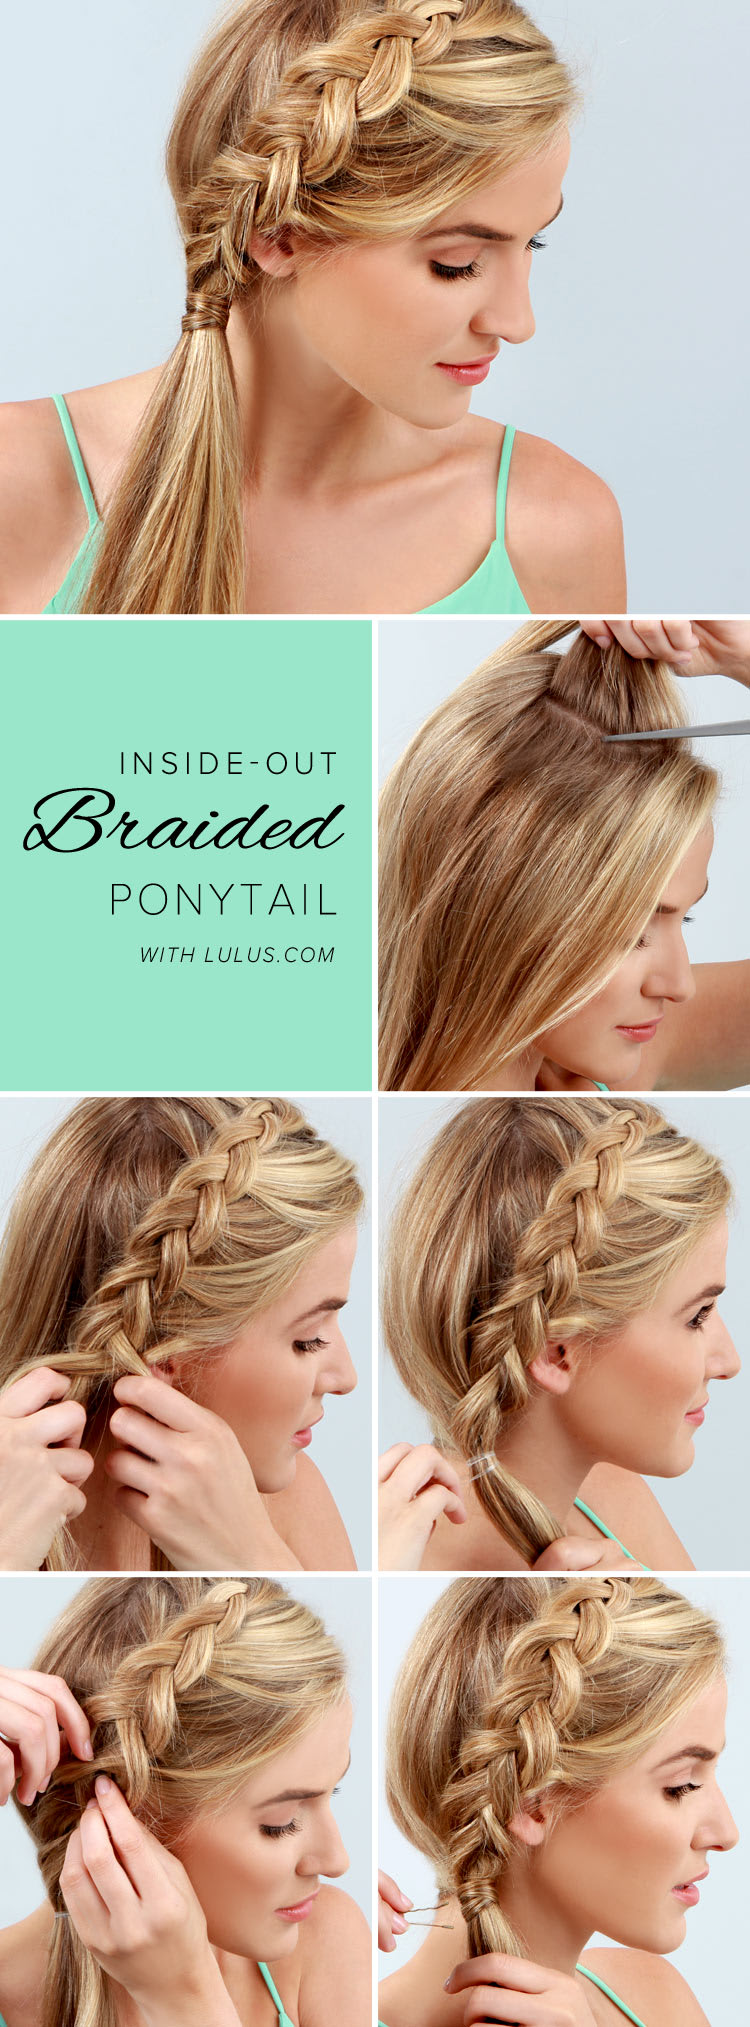 Lulus How-To: Inside-Out Braided Ponytail  Fashion Blog